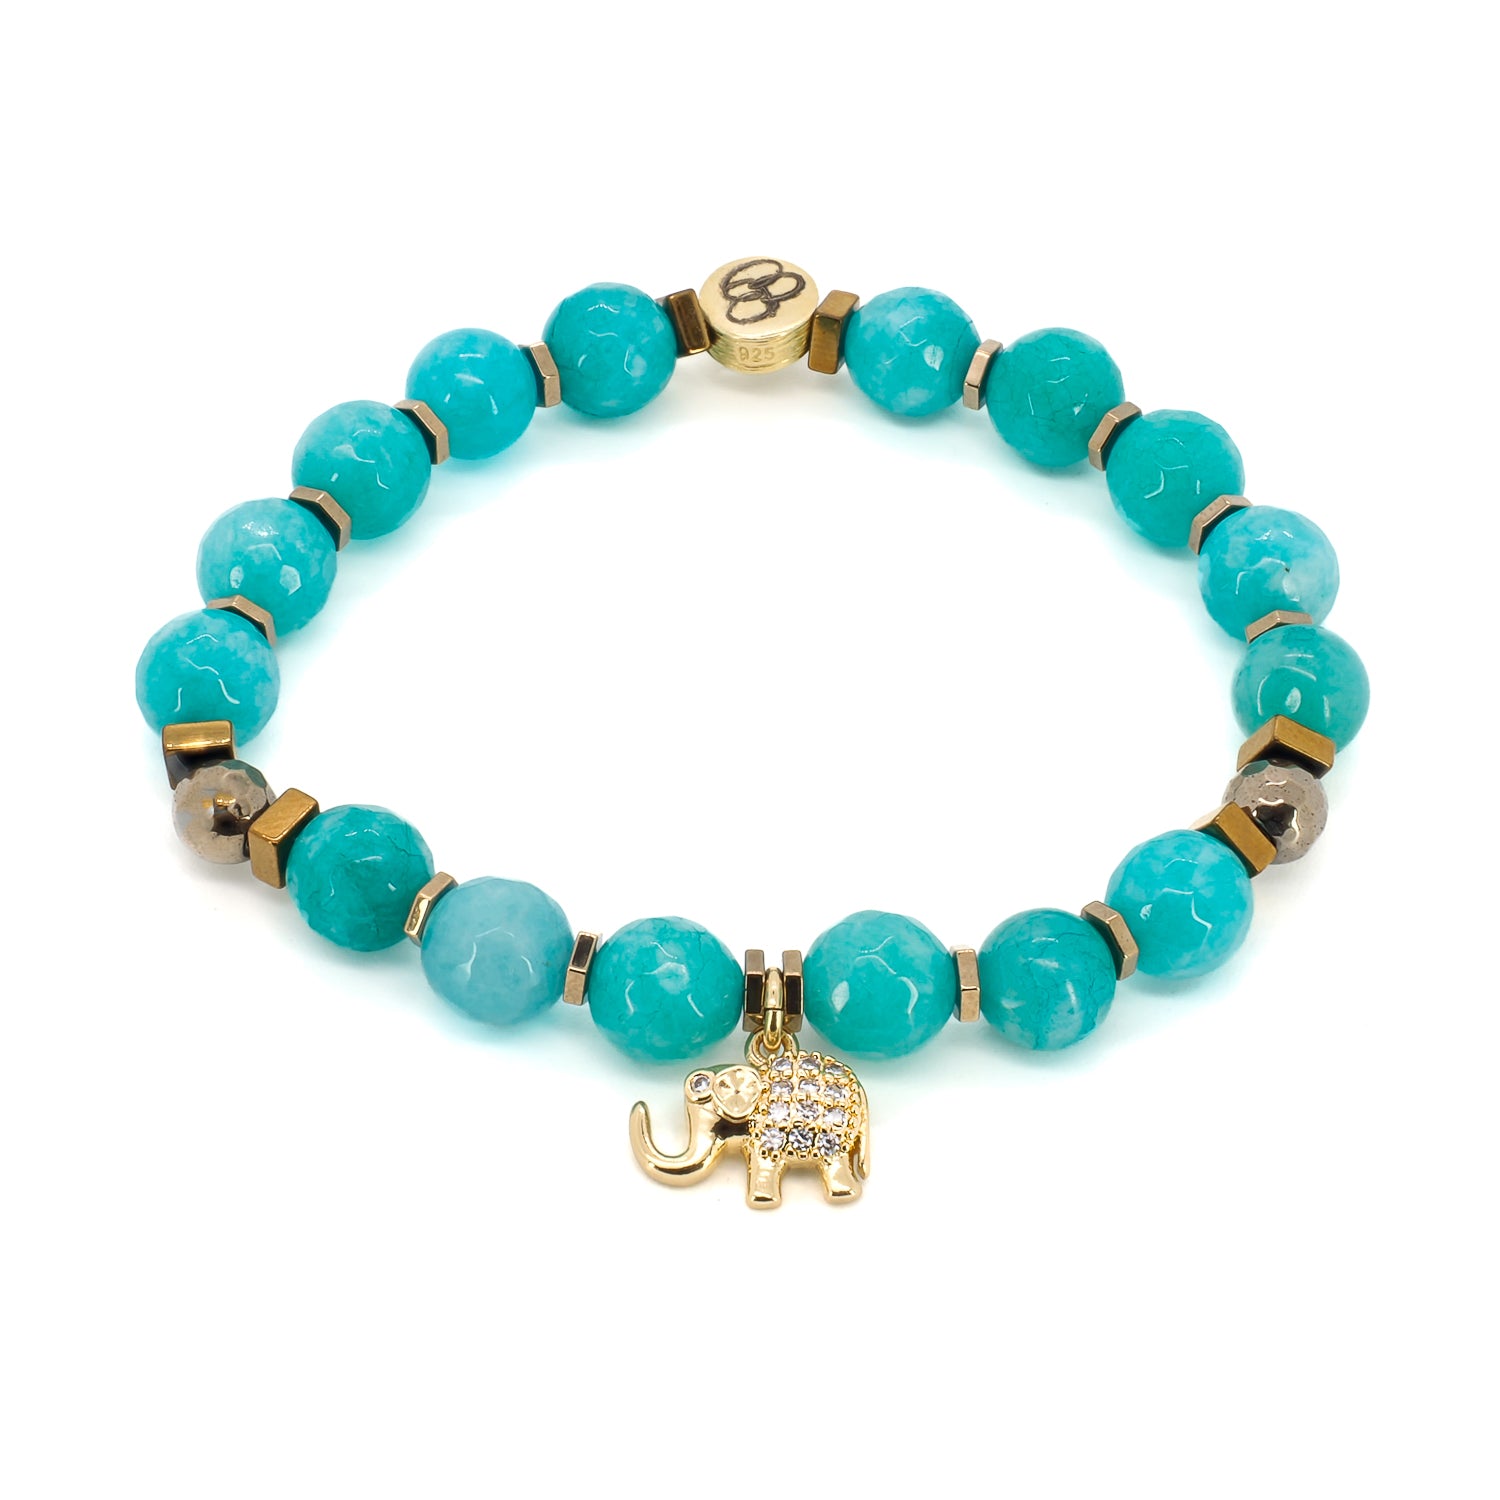 Bring balance and tranquility to your life with our Amazonite Lucky Elephant Bracelet